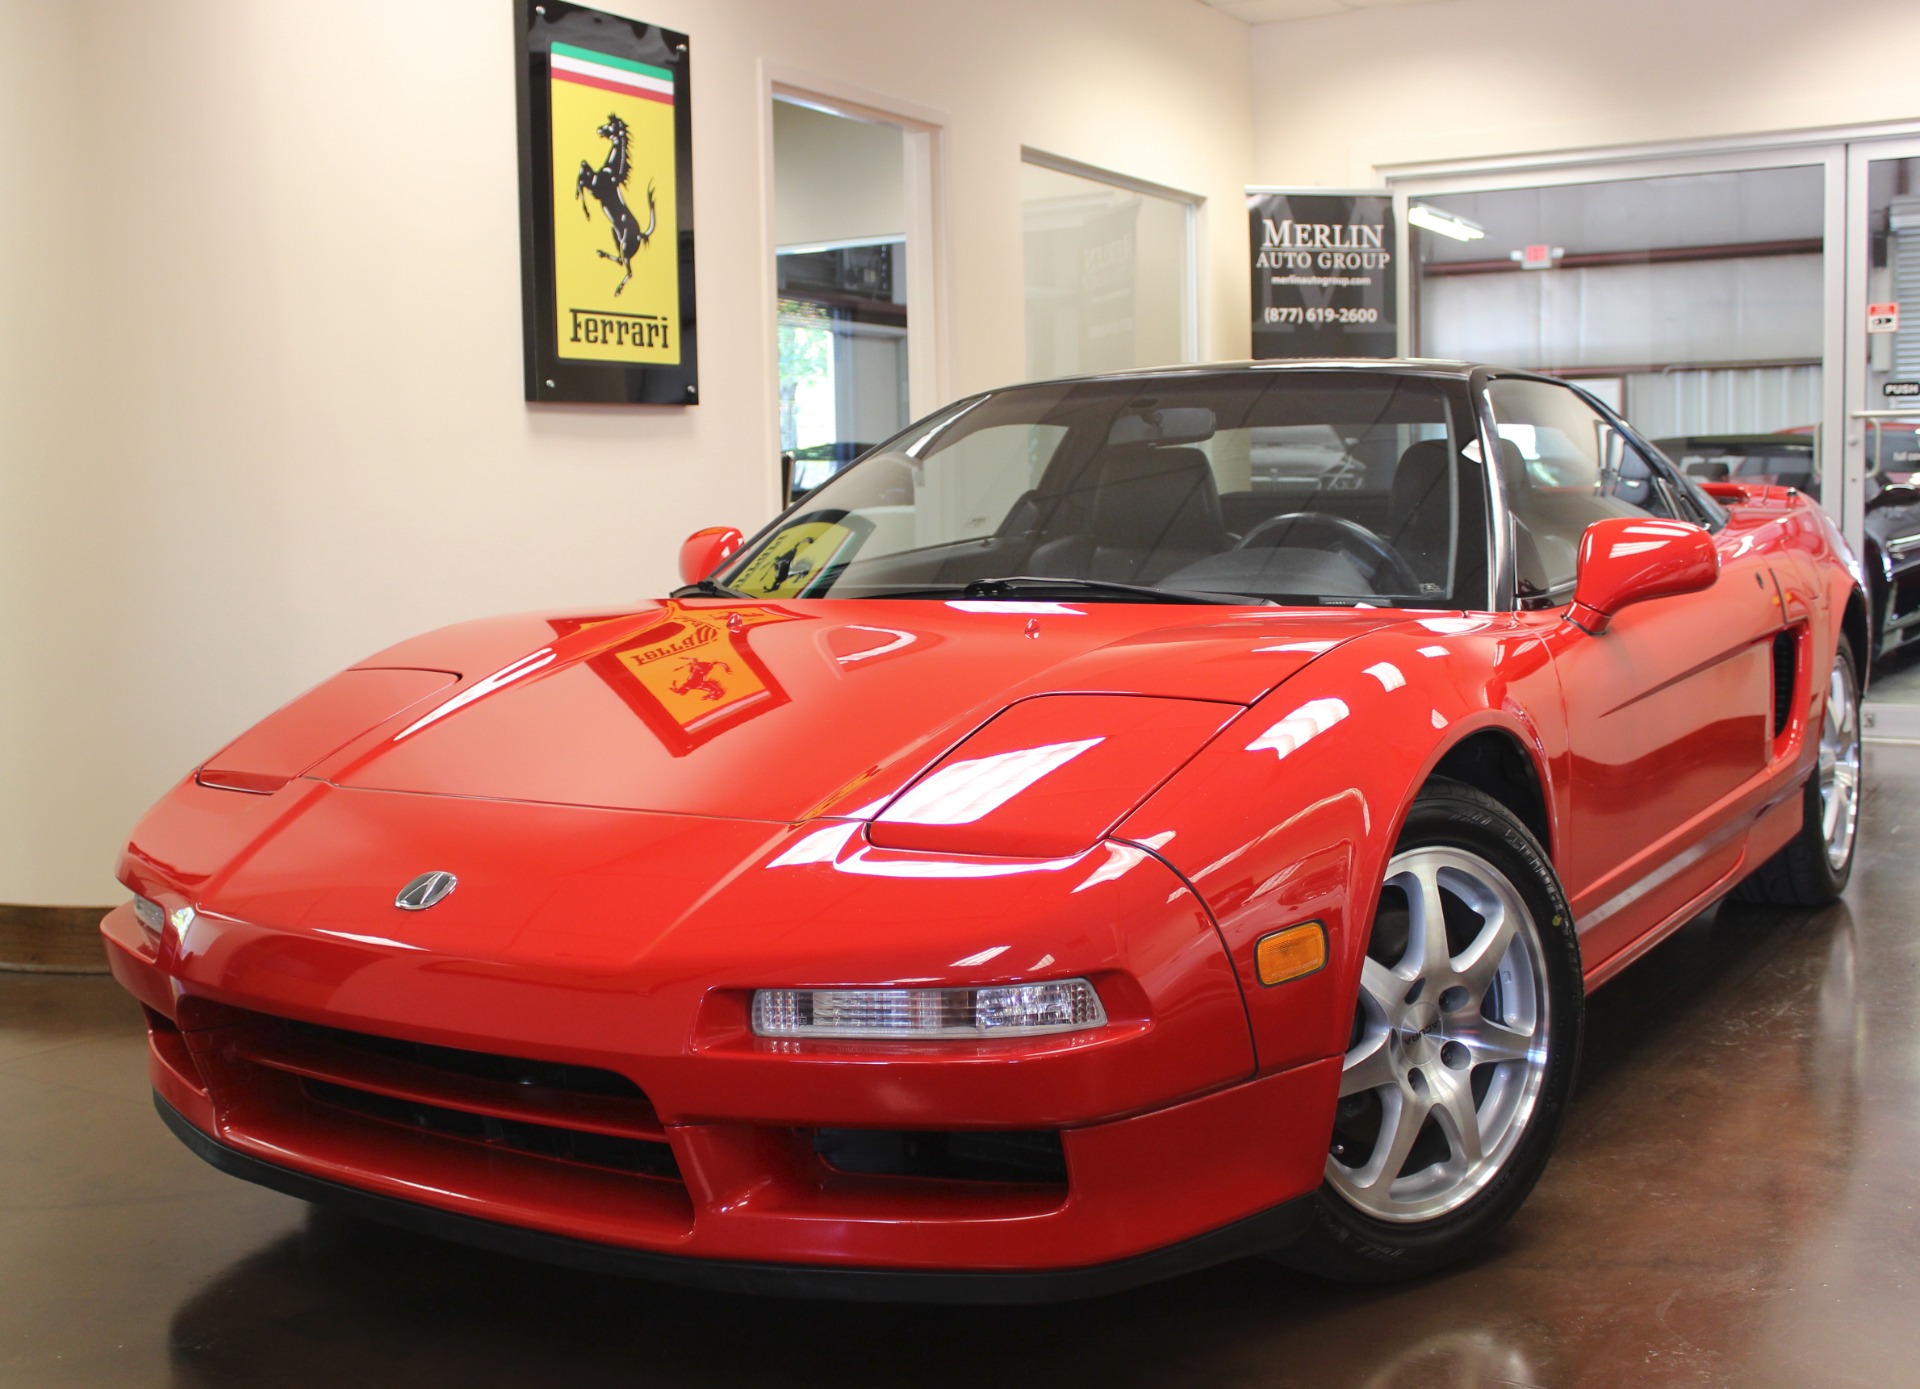 Used 1992 Acura NSX Red Coupe V6 3L M for sale - Acura NSX 1992 for